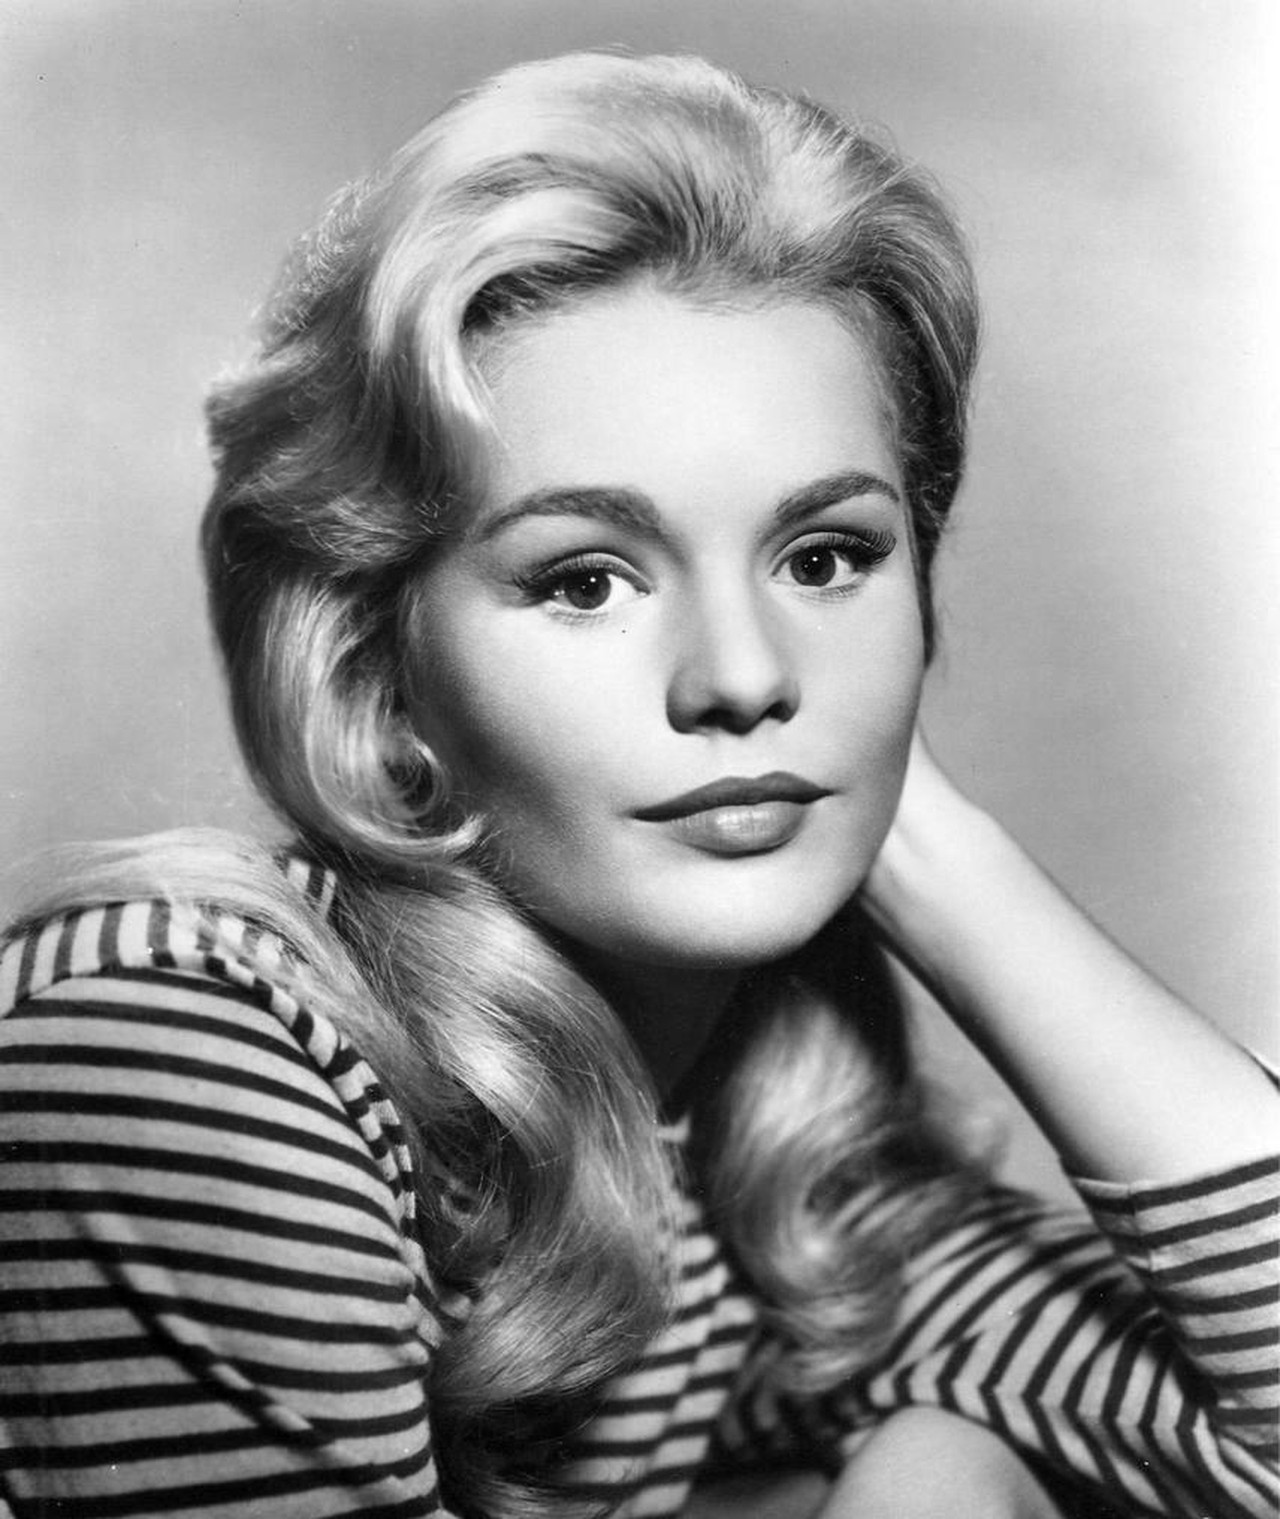 Tuesday Weld - Simple English Wikipedia, the free encyclopedia